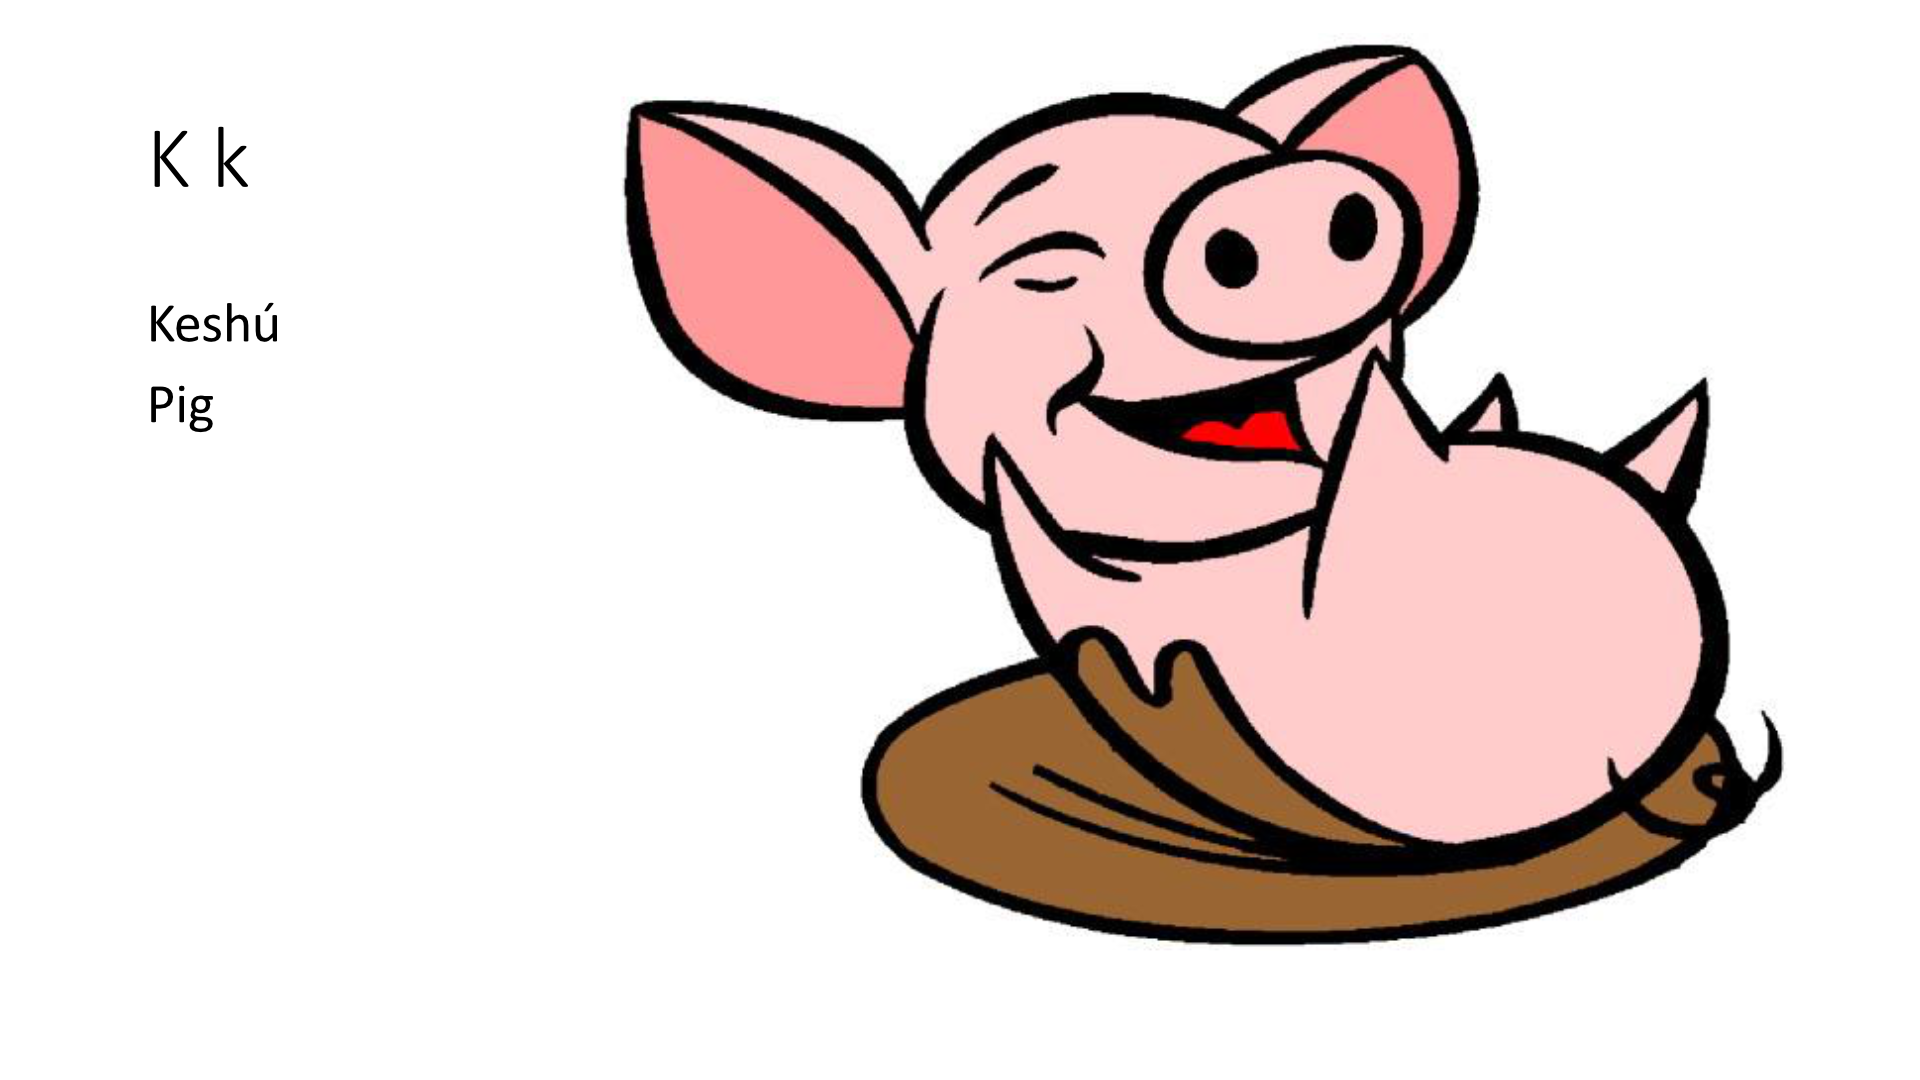 Illustration of a laughing pig